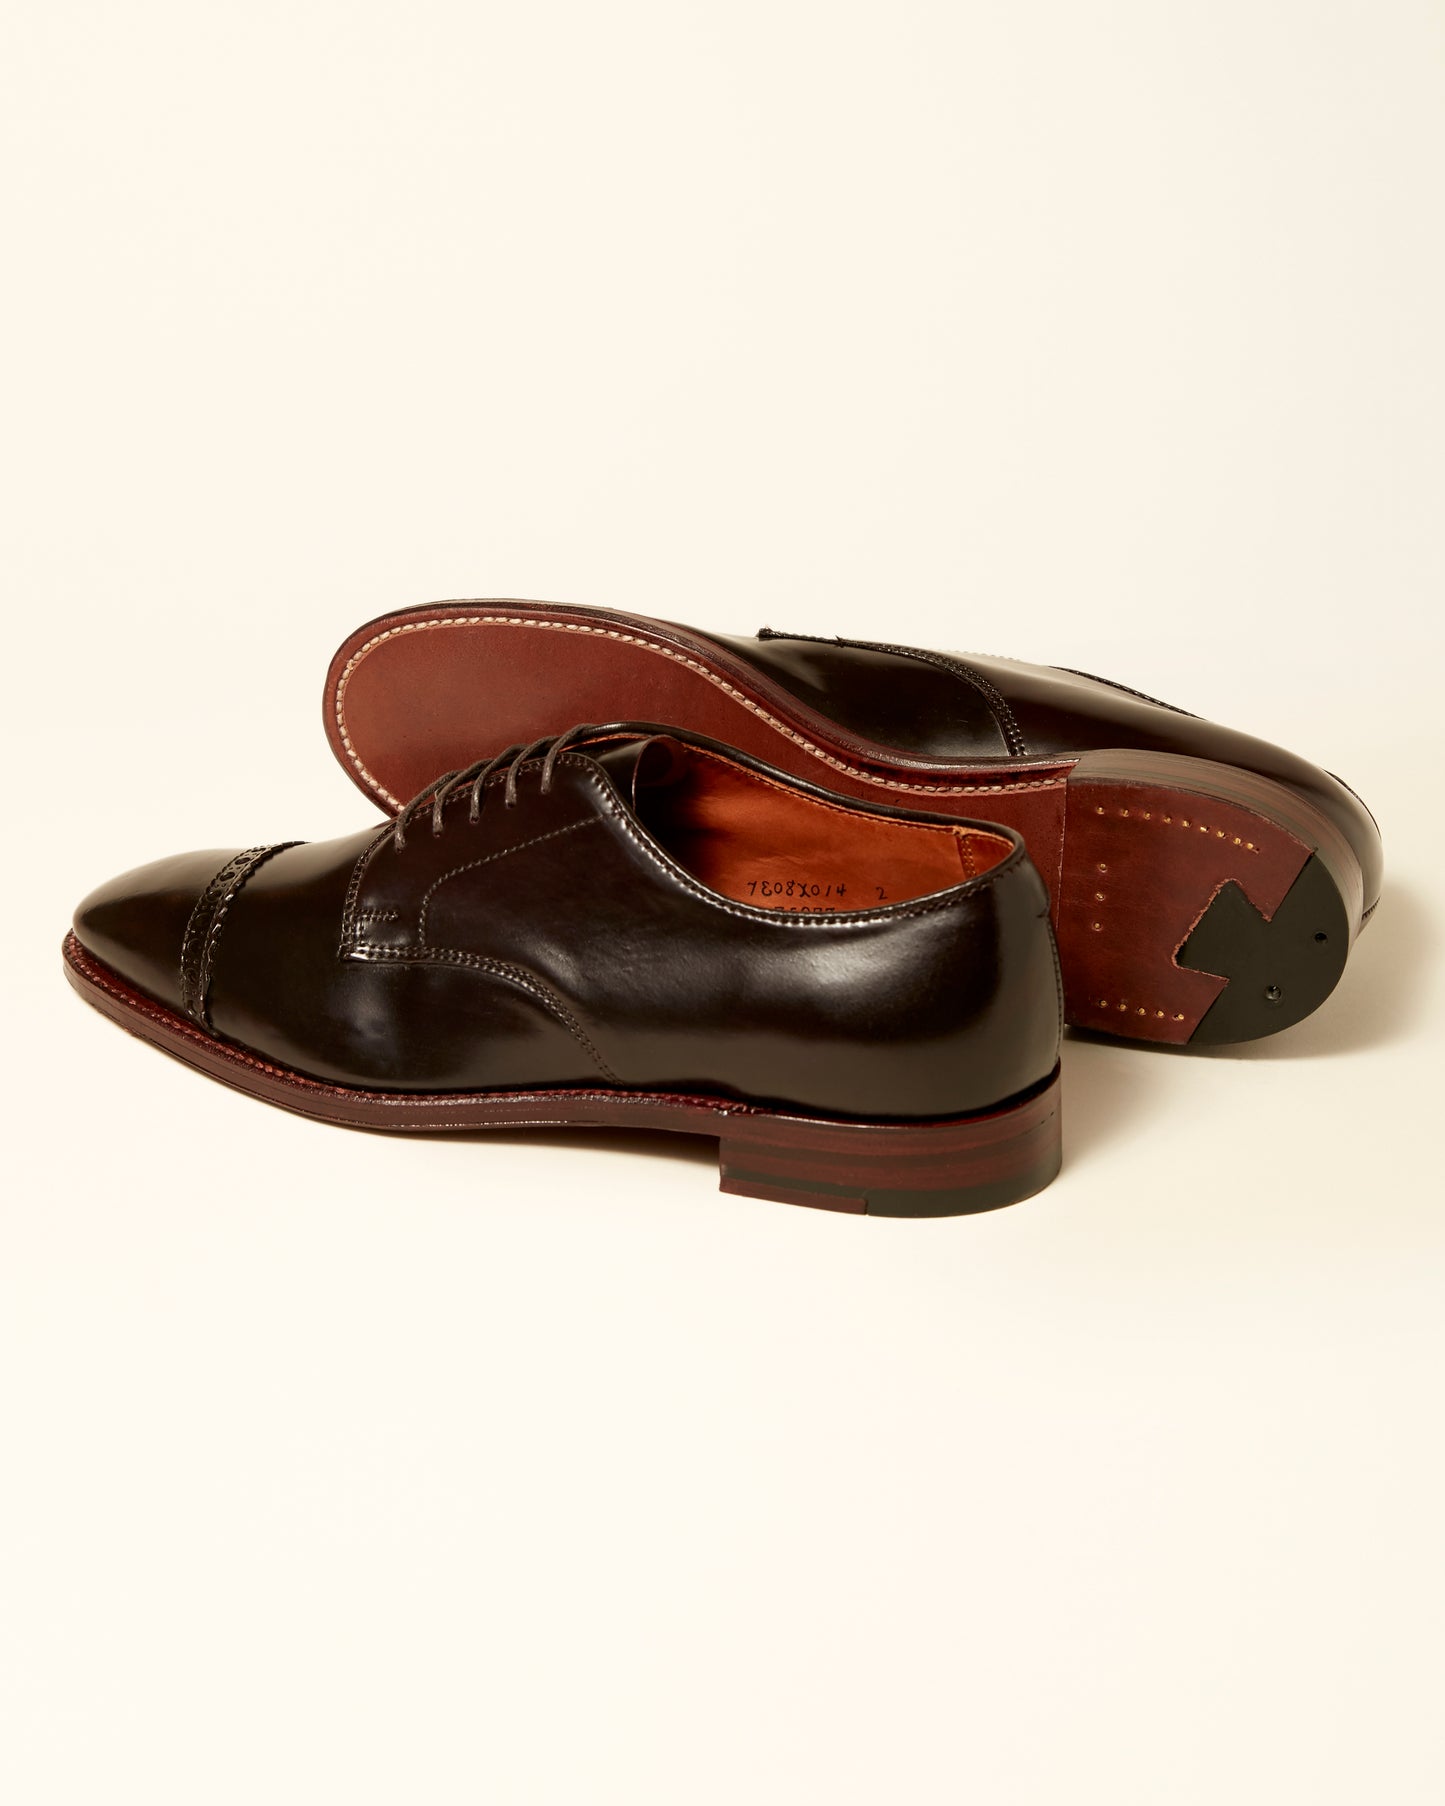 "Director" Unlined Perforated Tip Blucher in Color 8 Shell Cordovan, Plaza Last